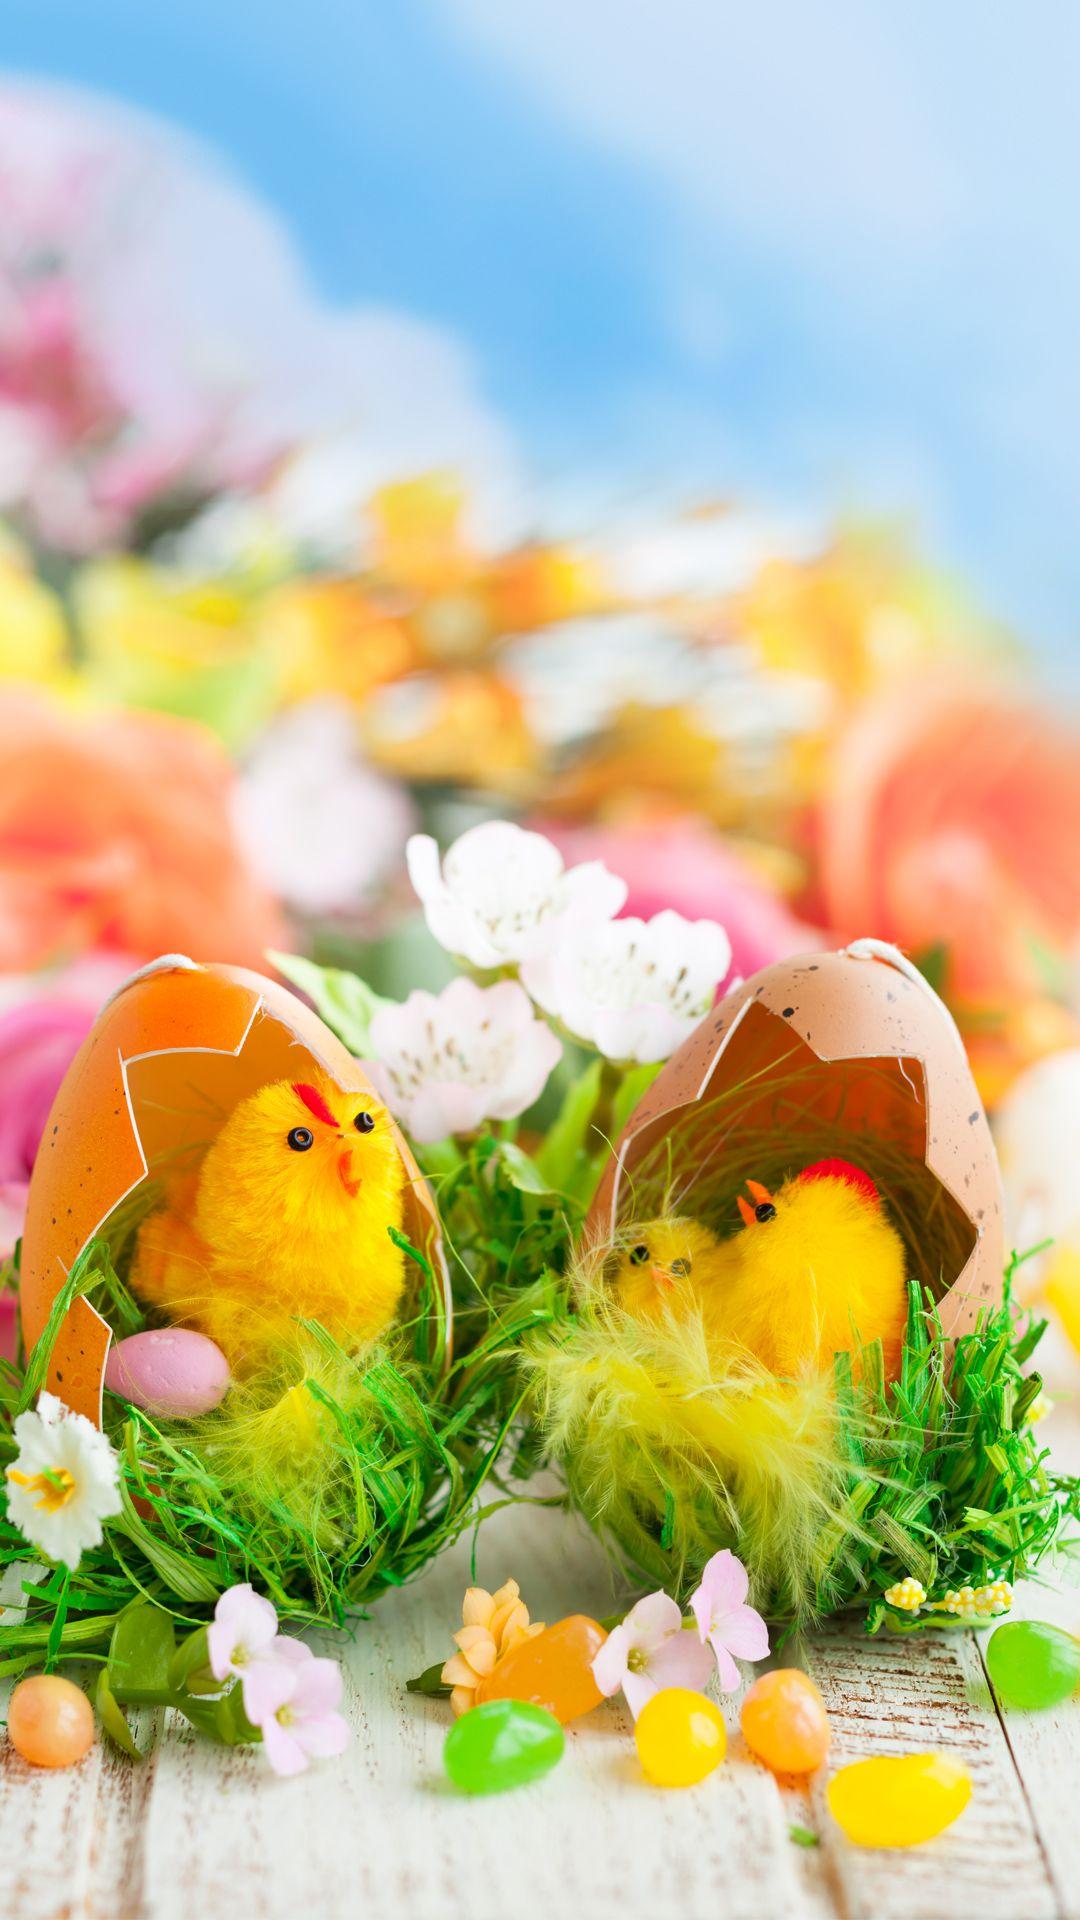 10 Cute and Free Easter Wallpapers for iPhone  Guiding Tech